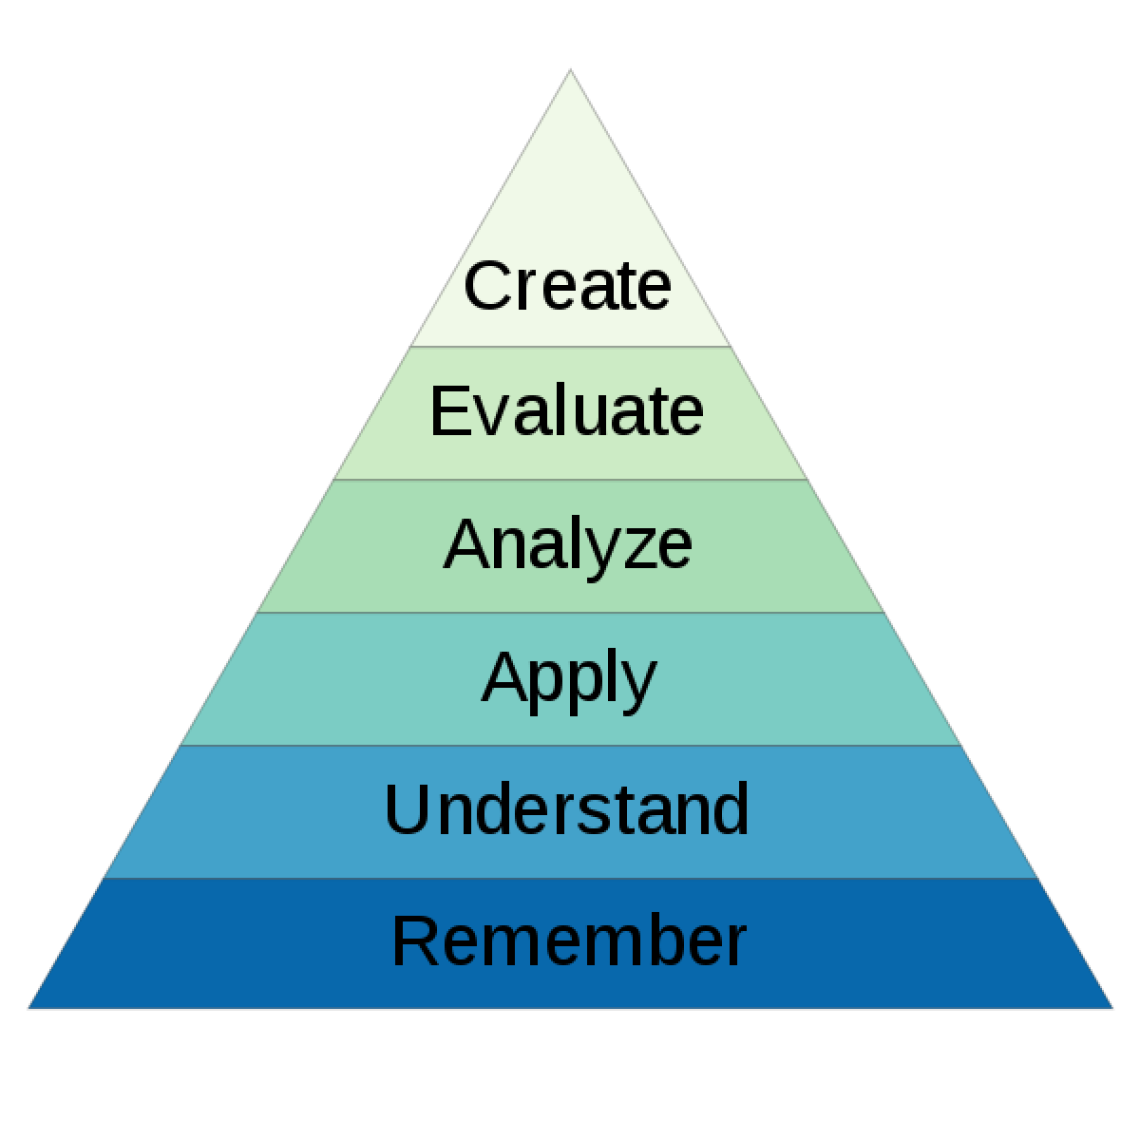 Bloom’s taxonomy of cognitive understanding, showing in order from the lowest to highest level: remember, understand, apply, analyze, evaluate, create.